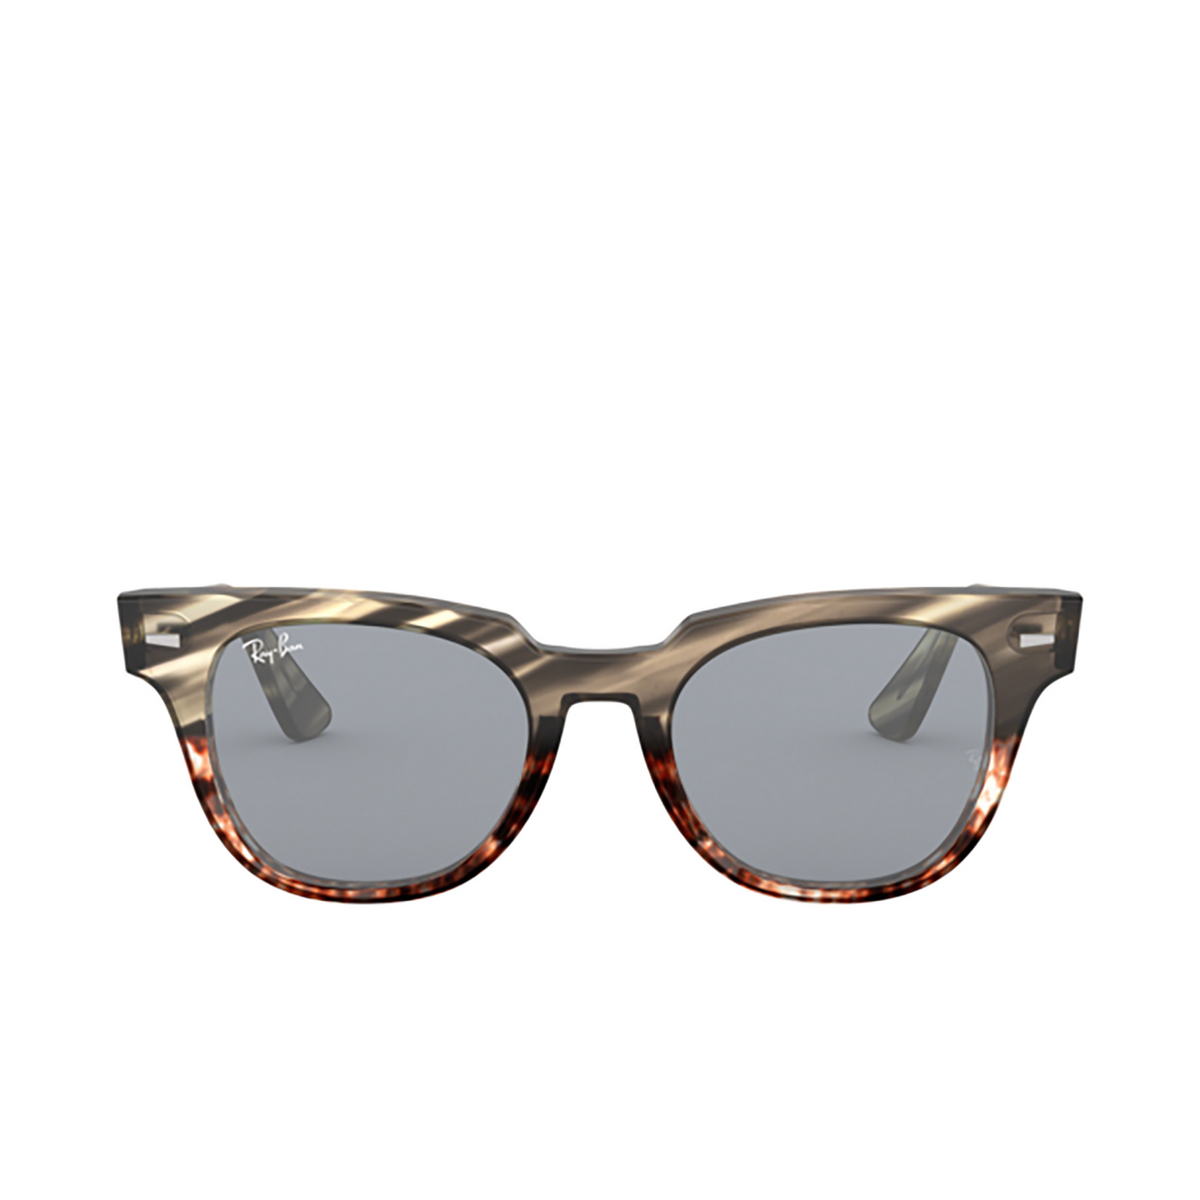 Ray-Ban® Square Sunglasses: Meteor RB2168 color Grey Gradient Brown Stripped 1254Y5 - front view.